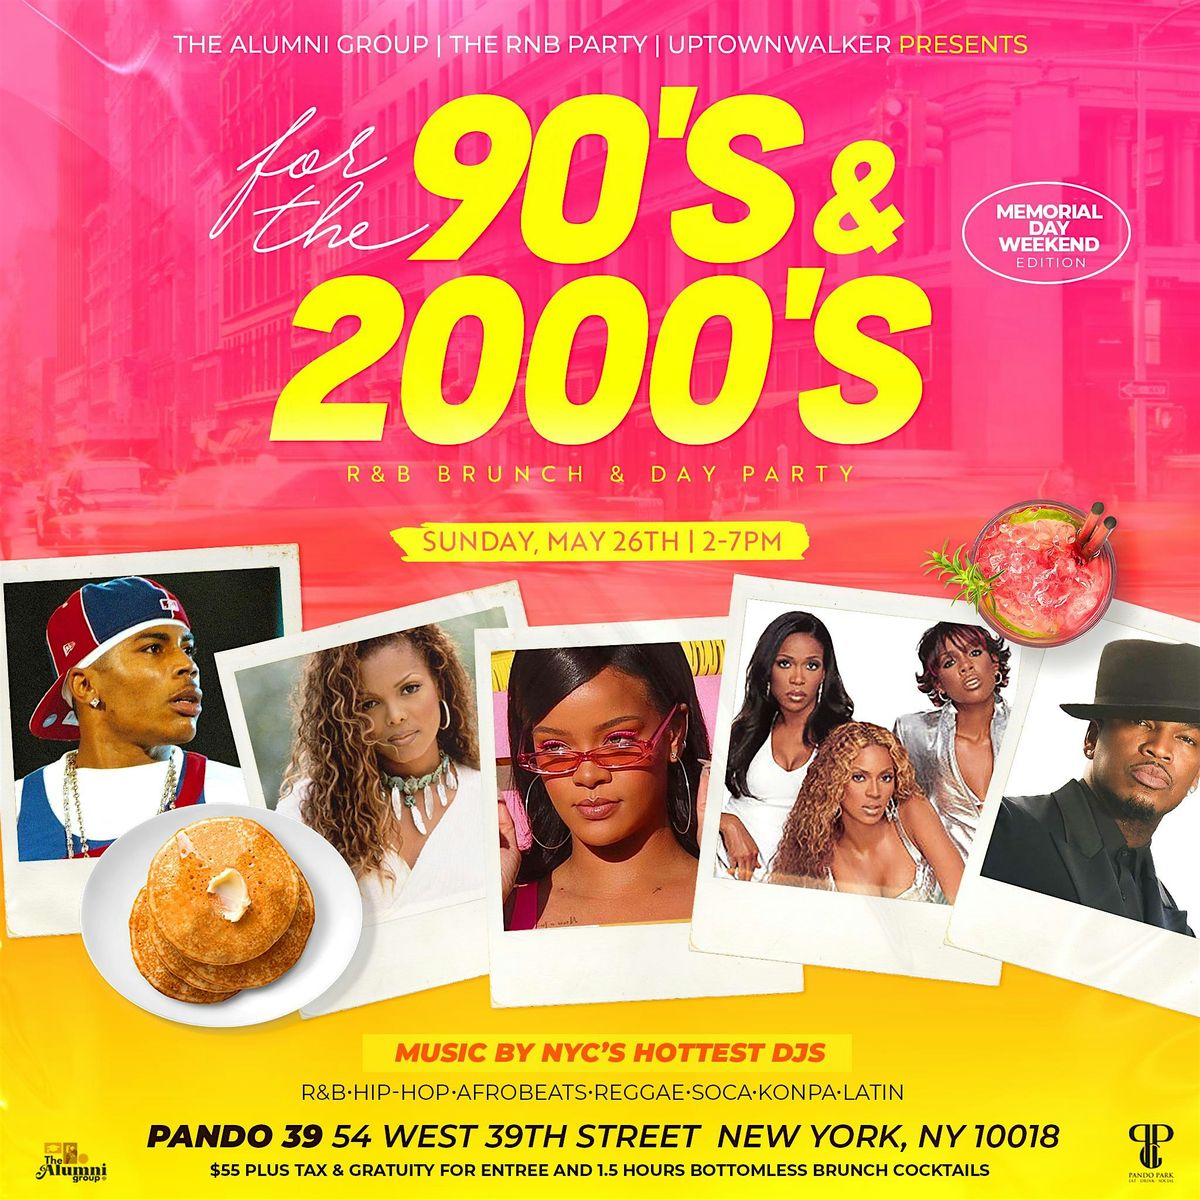 90's & 2000's Brunch & Day Party - Memorial Day Weekend